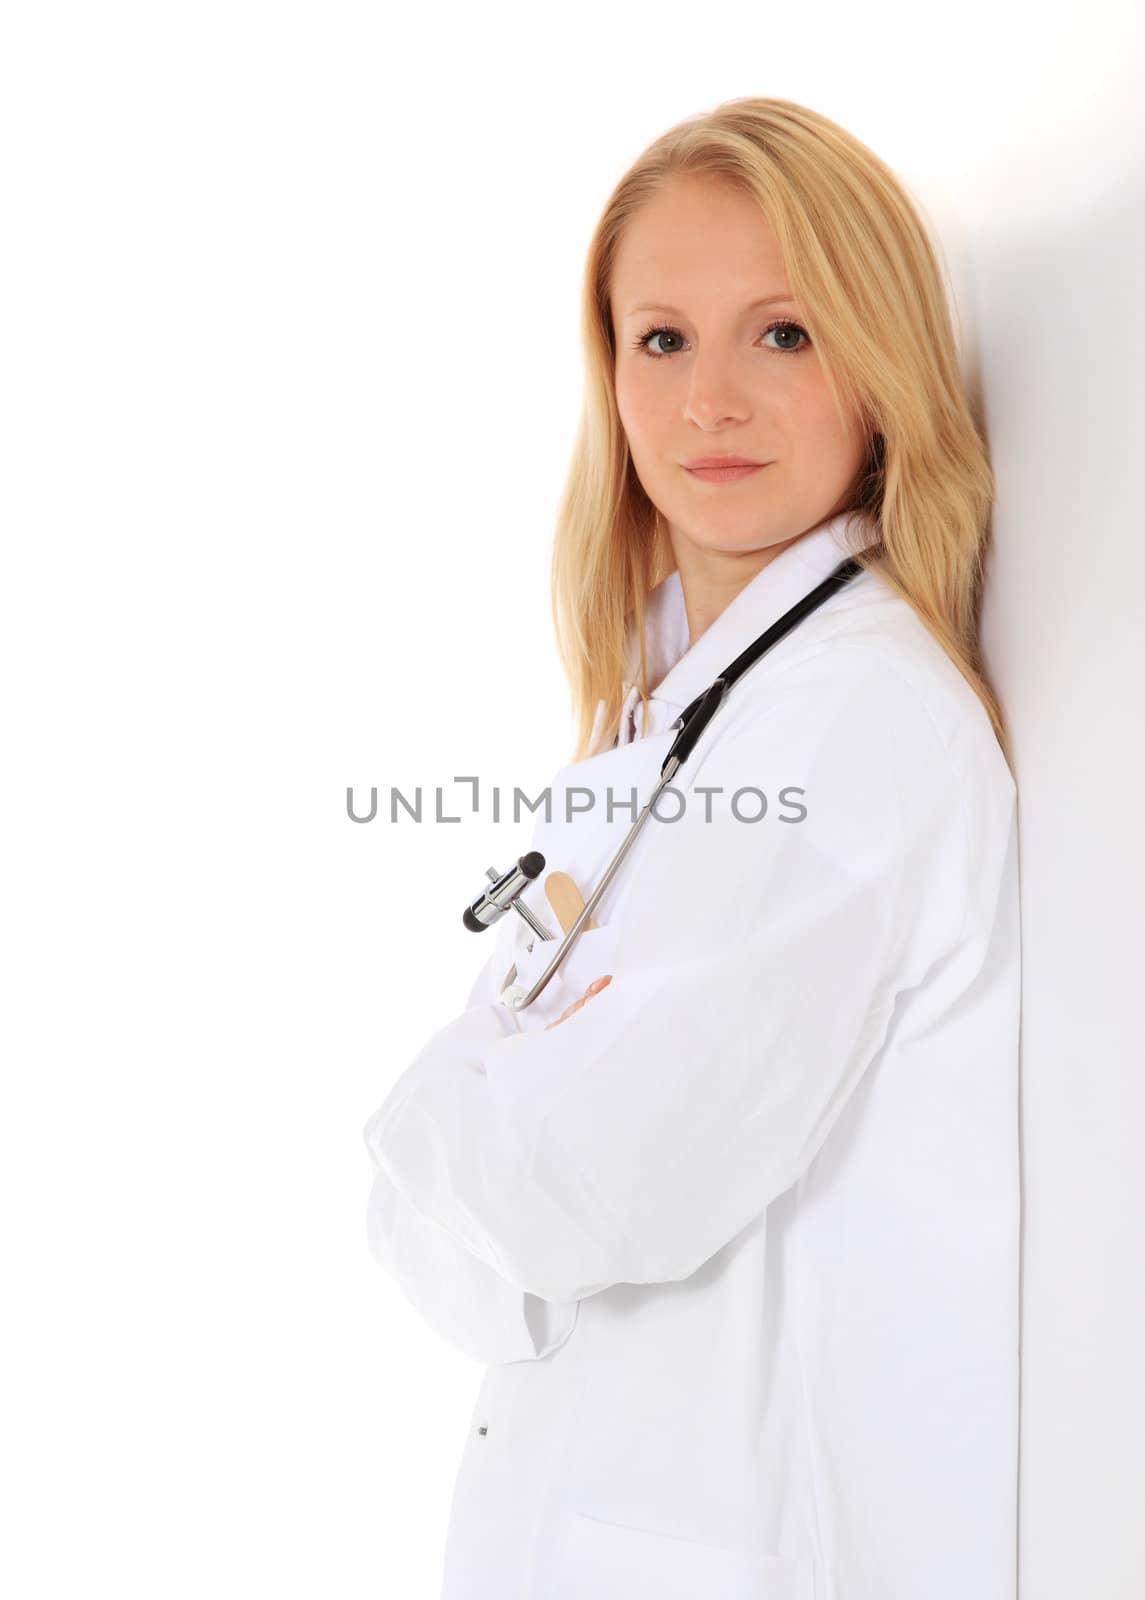 Competent young medical student leaning to the wall. All on white background.